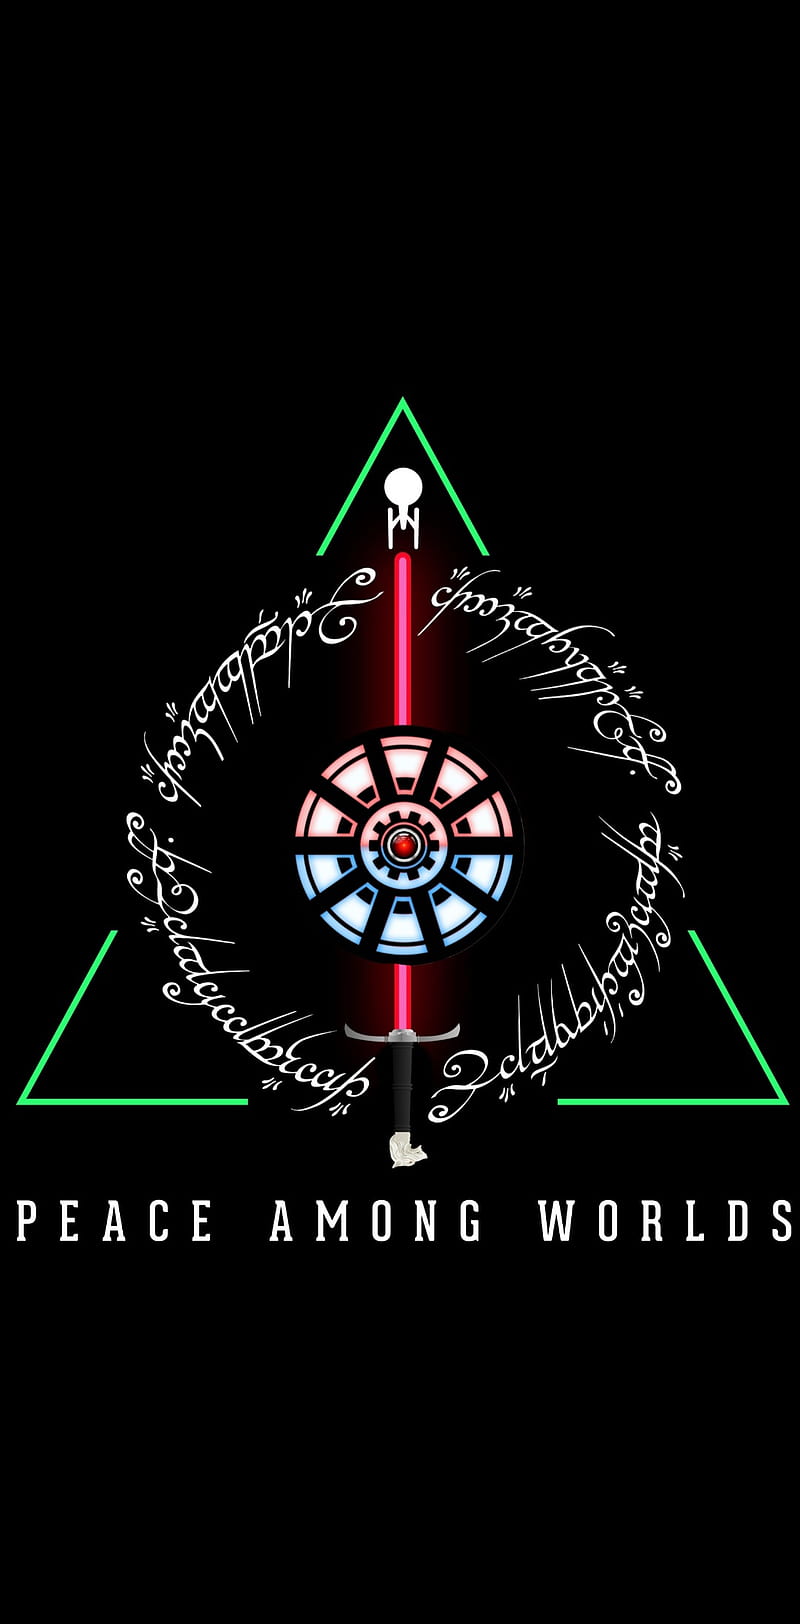 Peace Among Worlds, asteroids, game of thrones, harry potter, lord of the rings, space odyssey, star trek, star wars, HD phone wallpaper